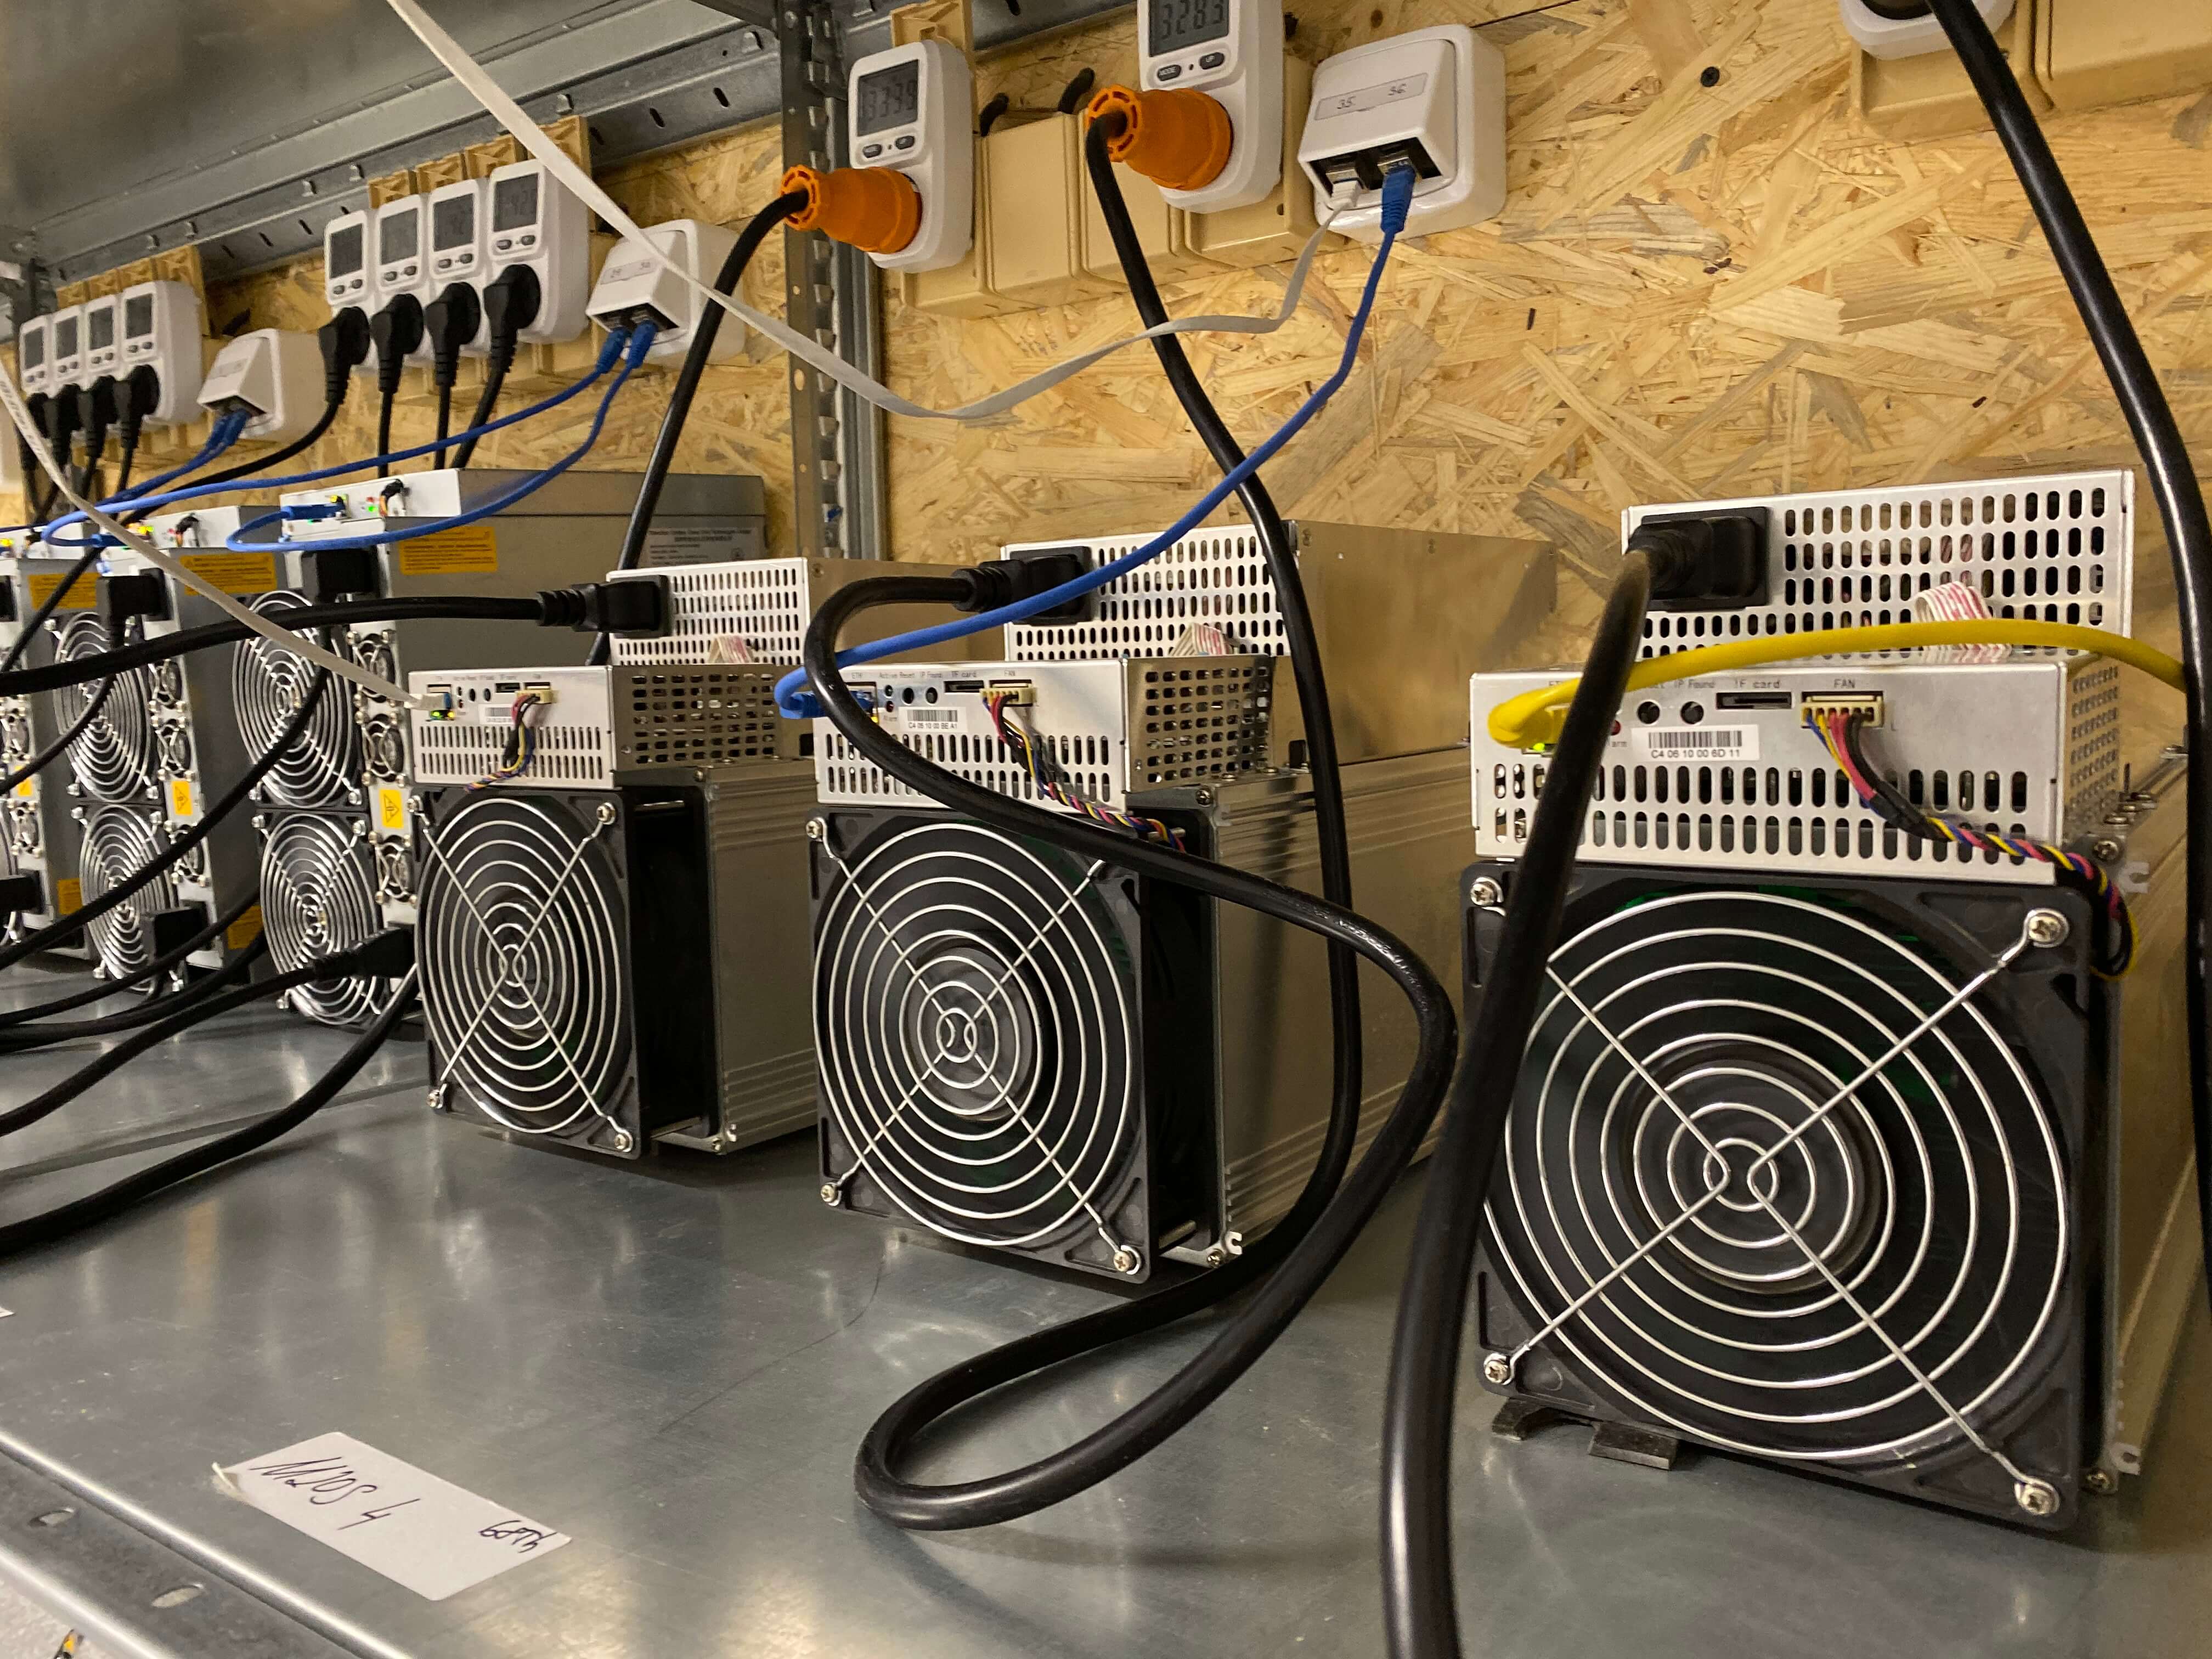 Do I Need a License to Mine Bitcoin? Bitcoin Mining Requirements